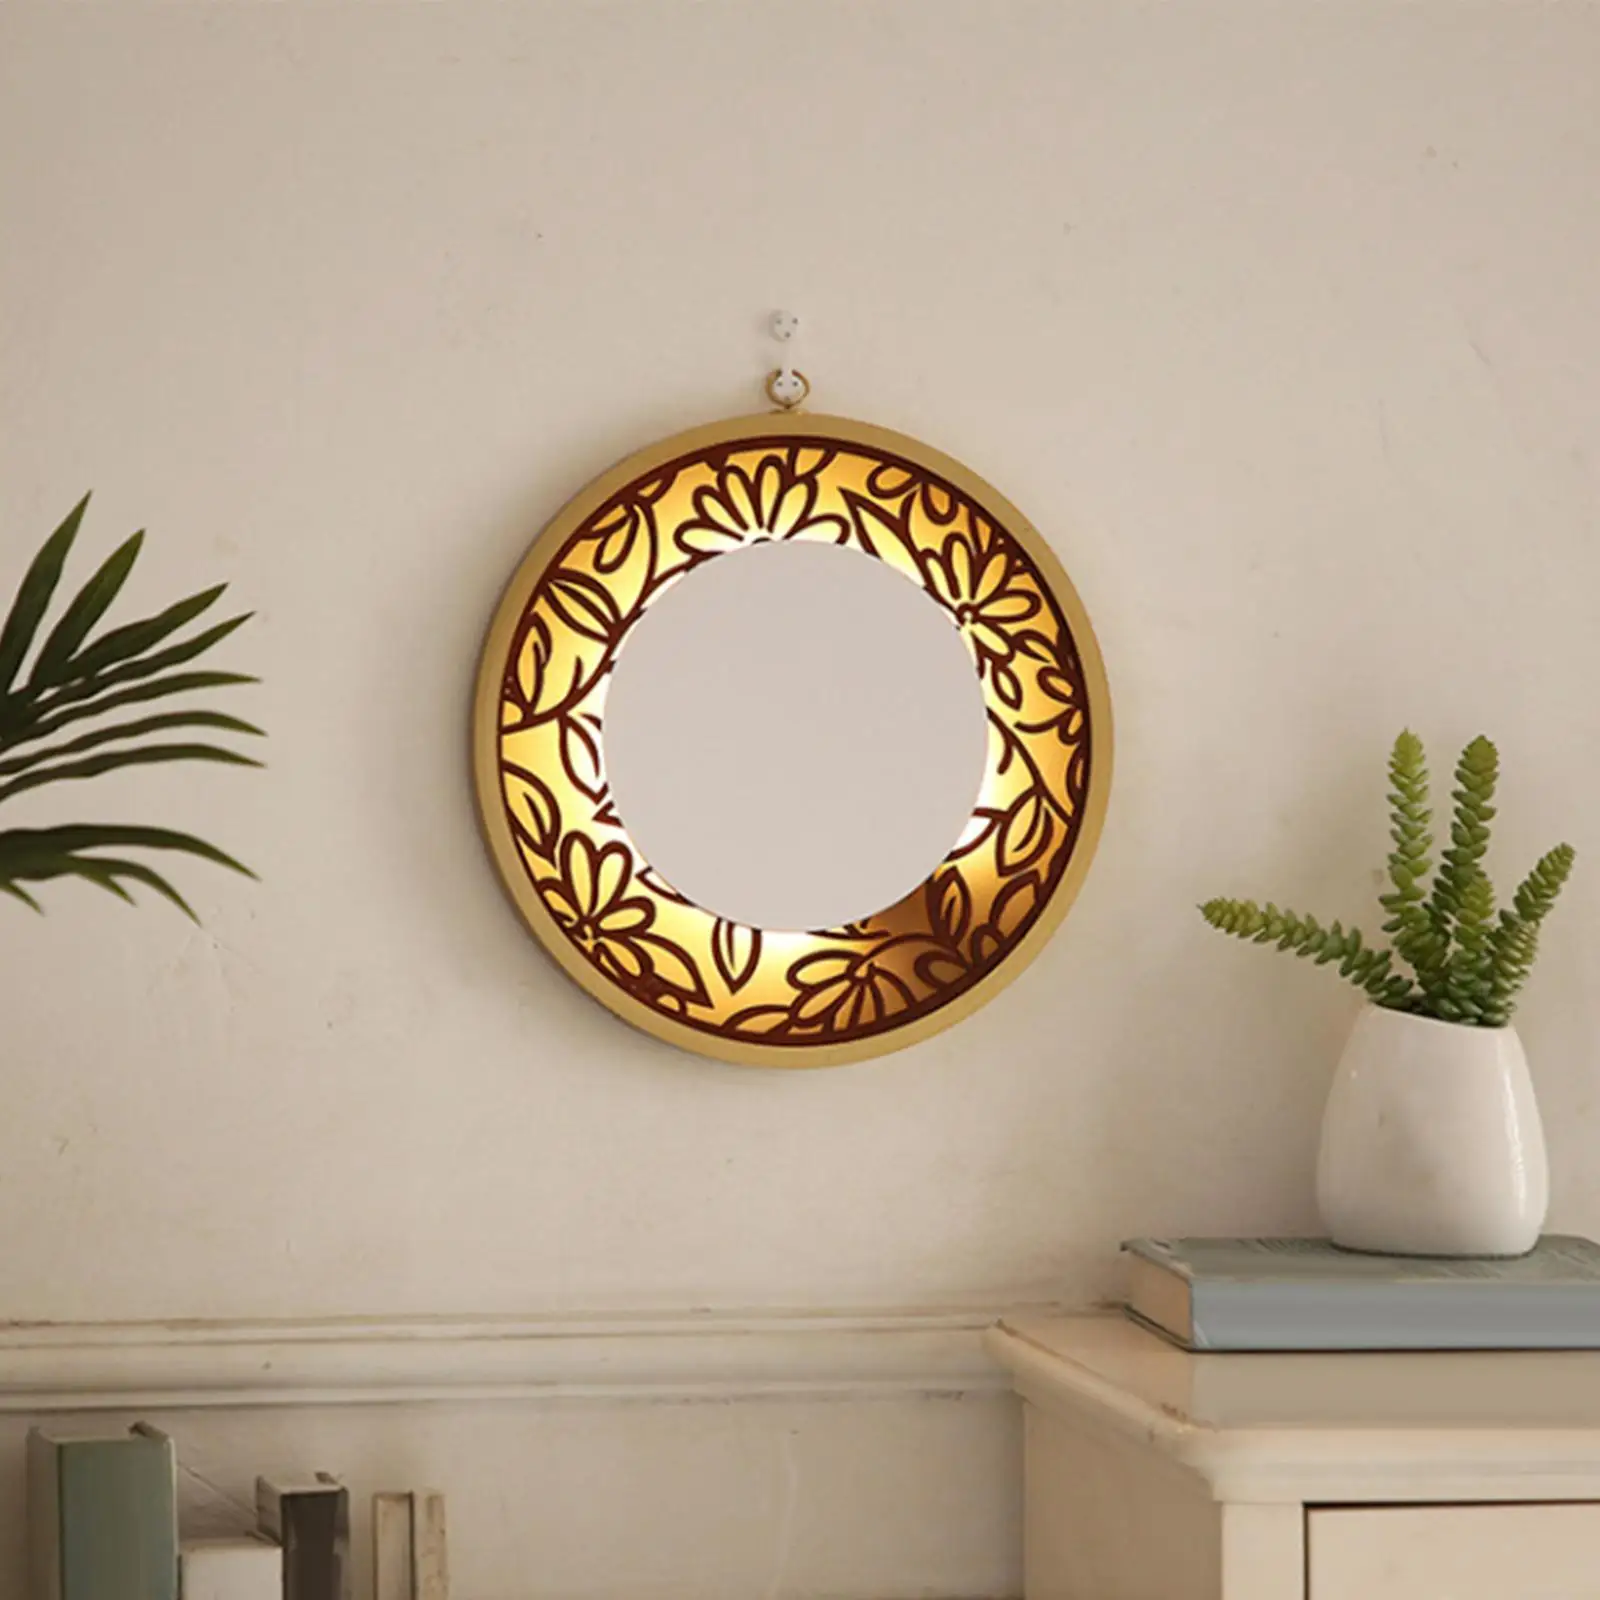 Rustic Wall Hanging Mirror Decorative with Light Circle Mirrors Wood Farmhouse for Hallway Hotel Decor Makeup Hall Wall Decor